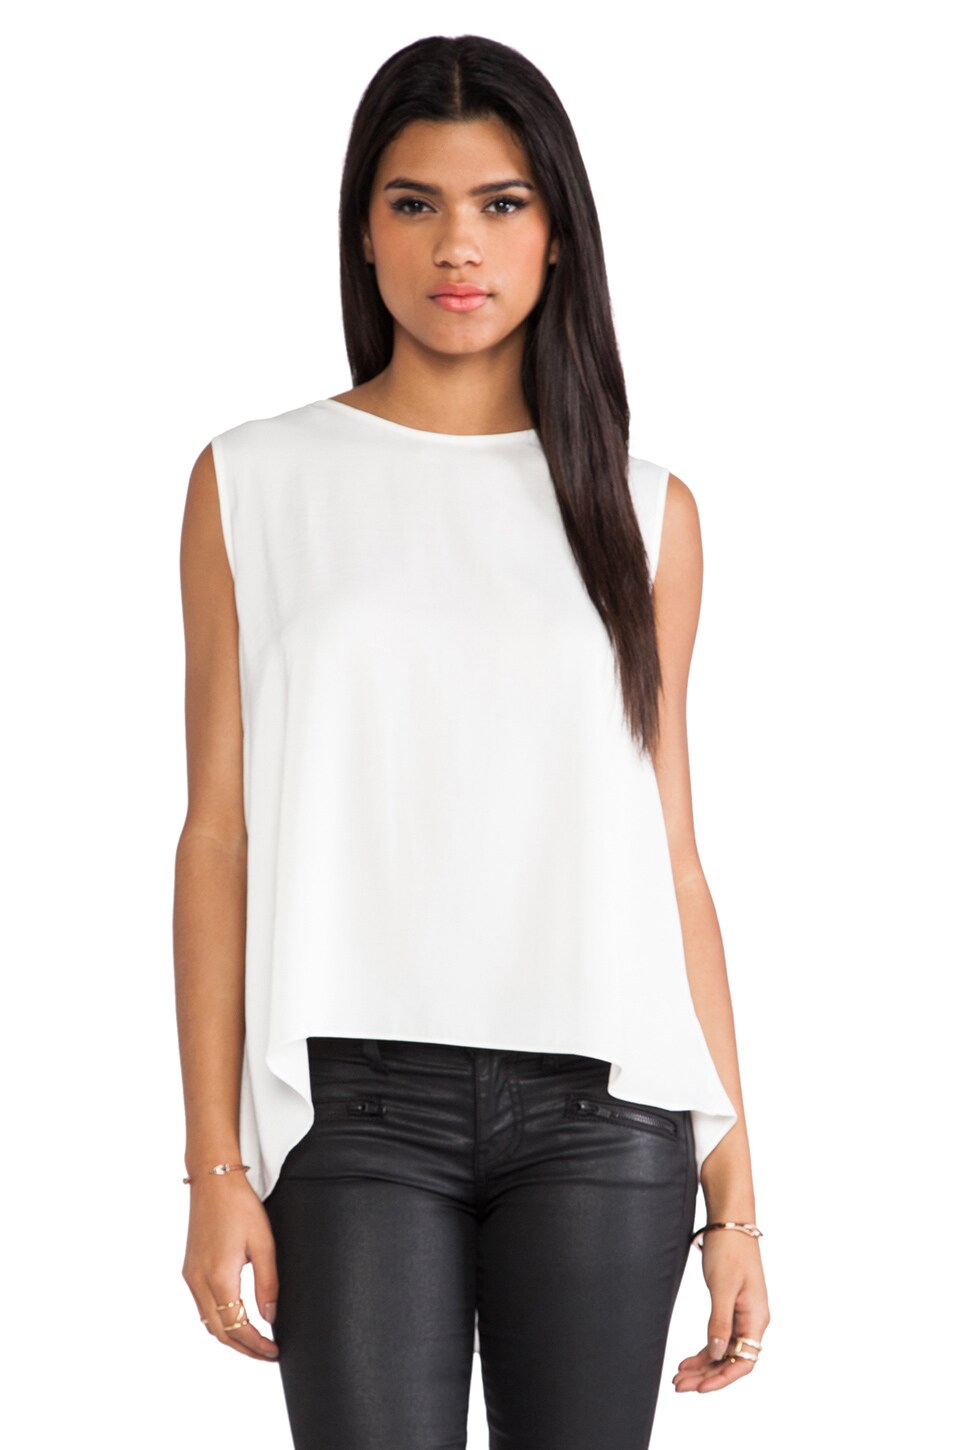 primary Embellished Torus Tank Top in White  Gold